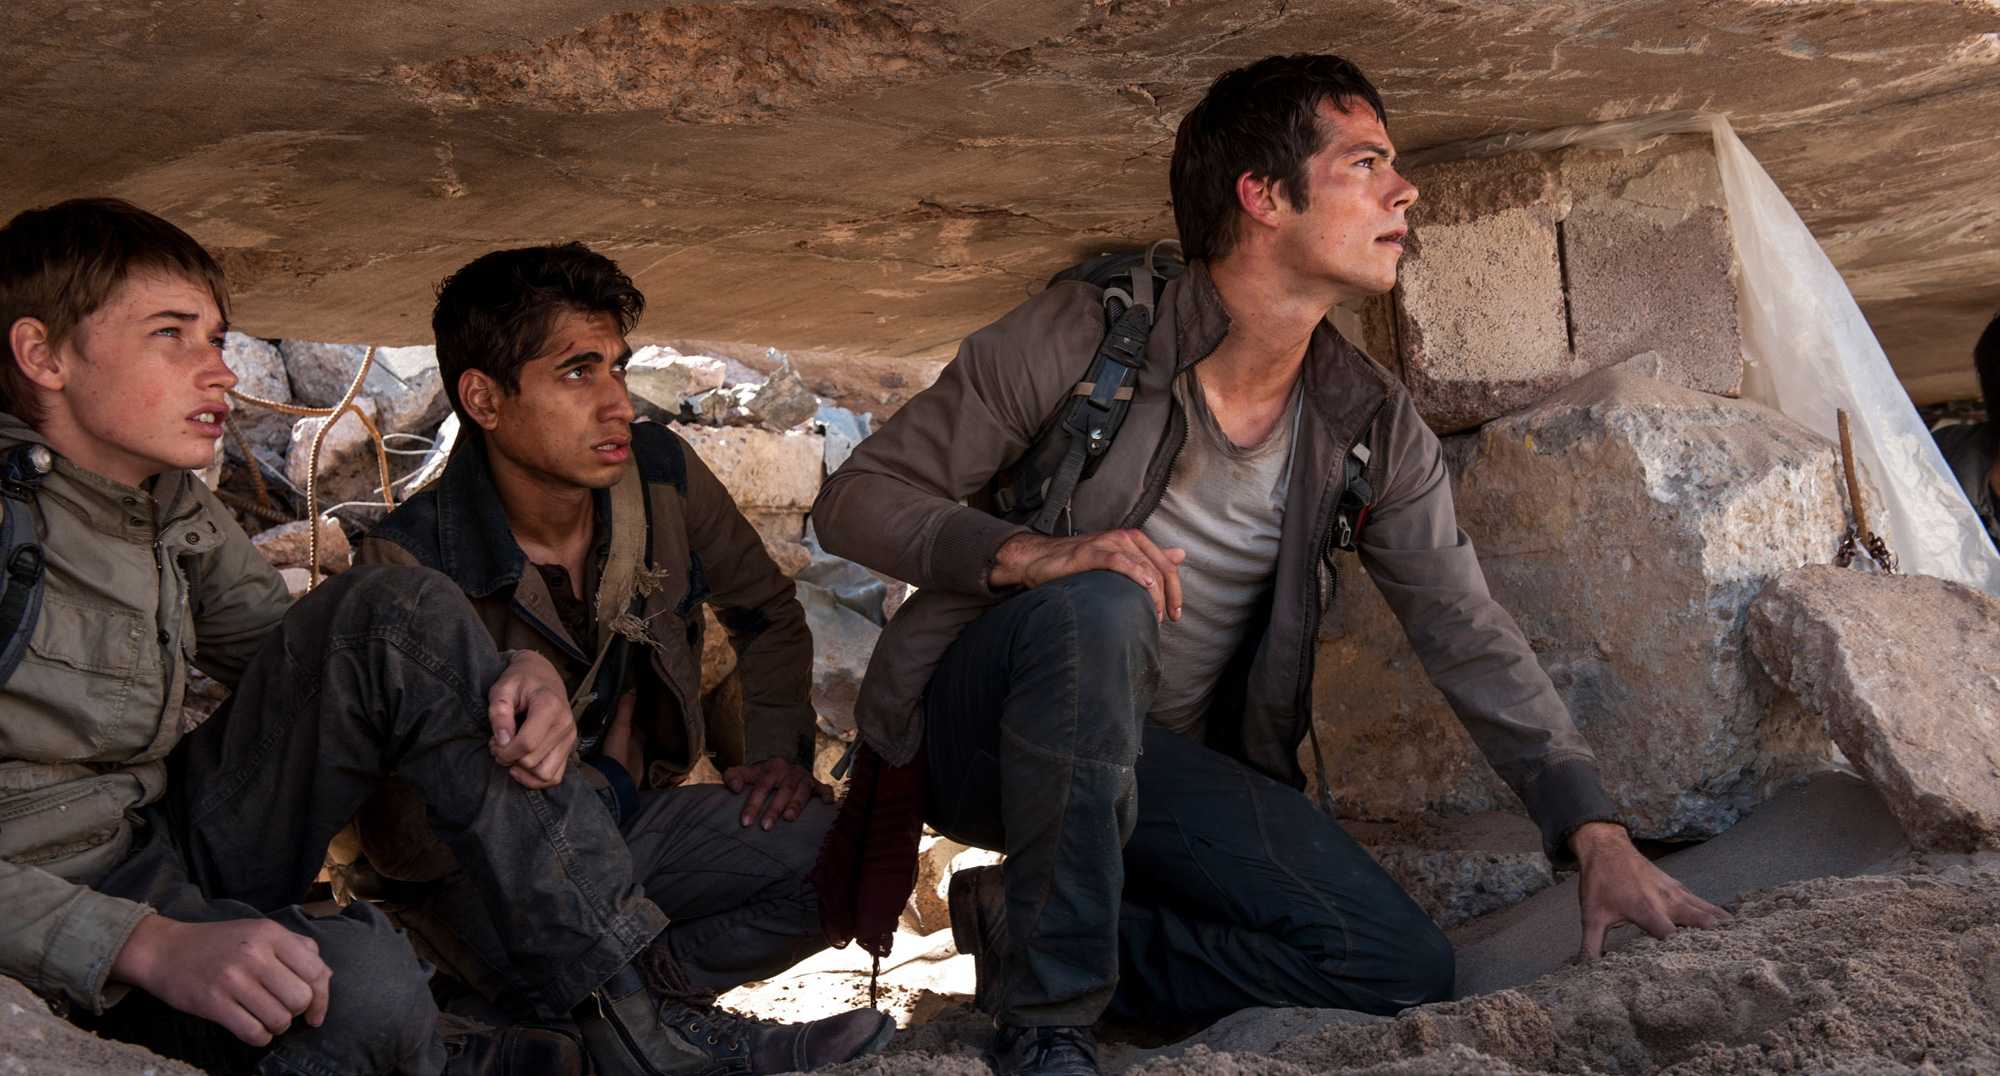 'Maze Runner: Scorch Trials' is now playing at Marcus Twin Creek Cinemas.